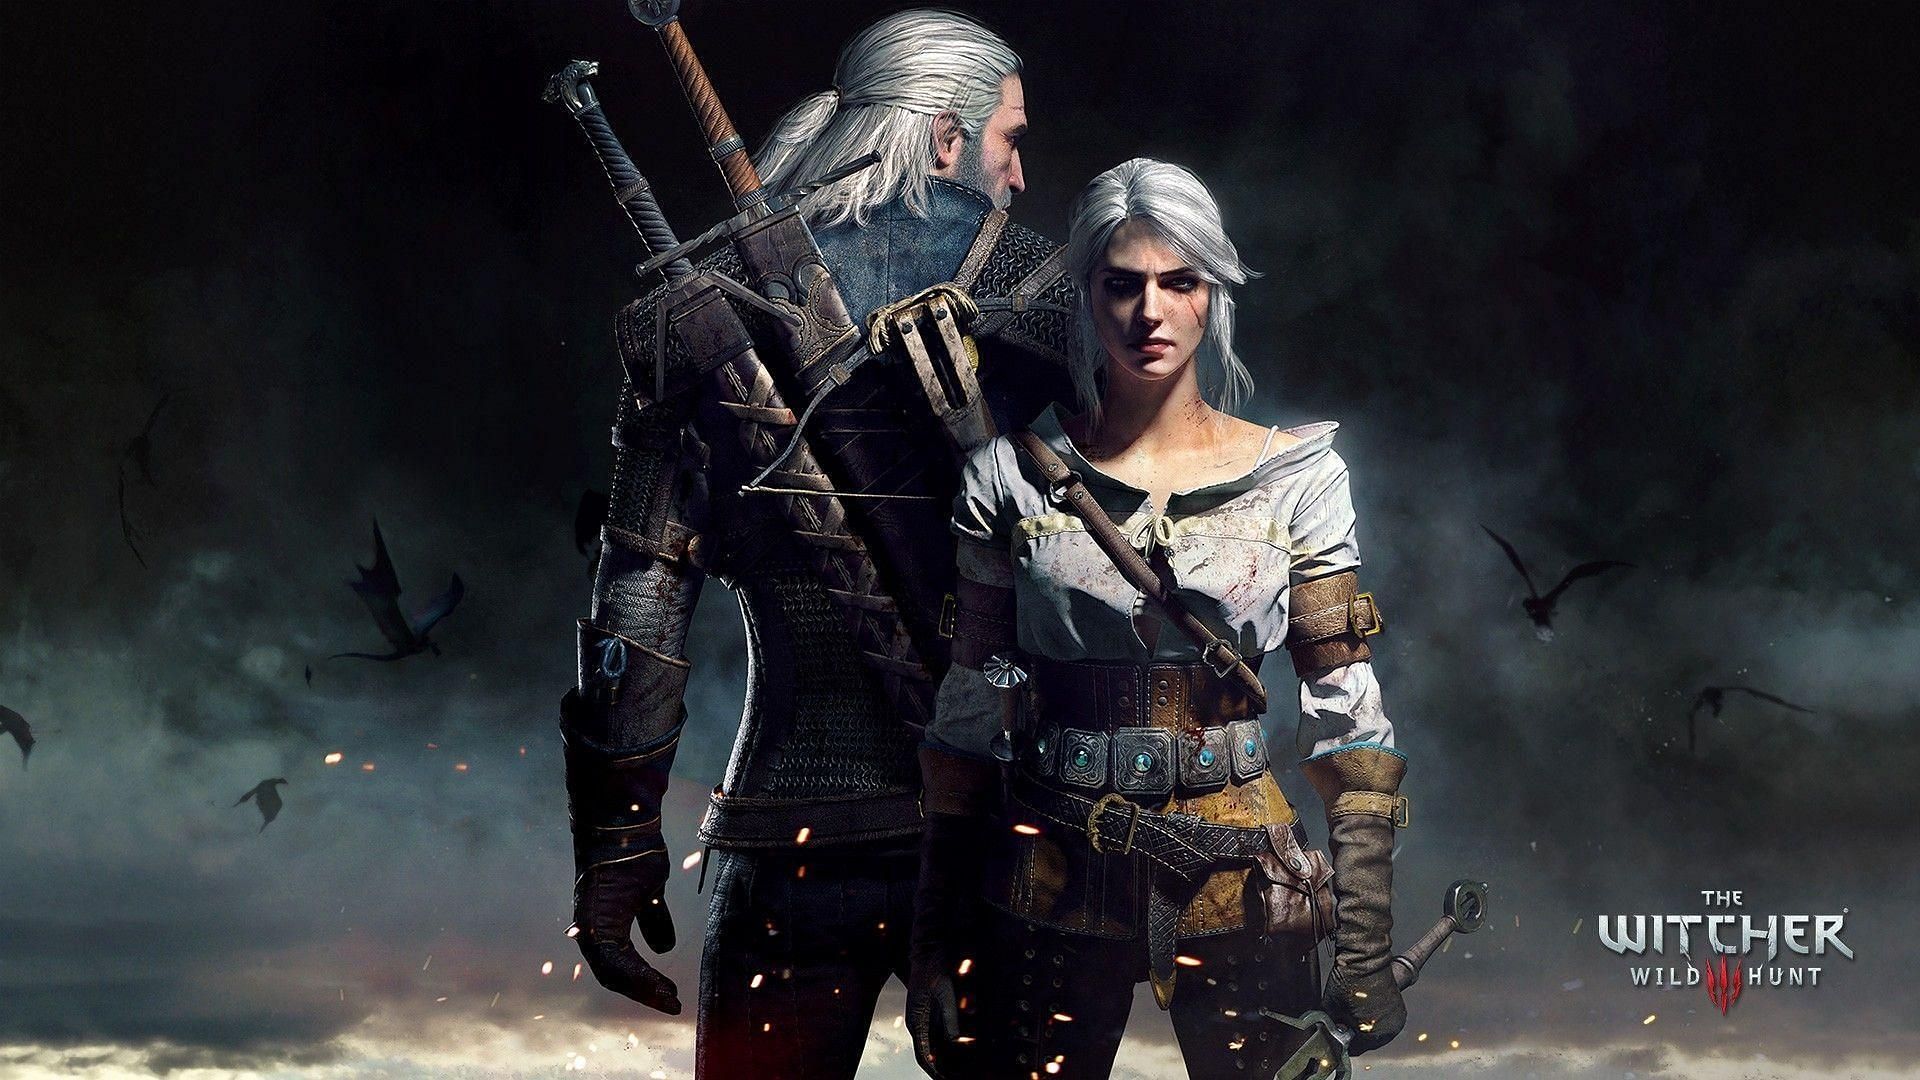 The Witcher 3: Wild Hunt (image via Youtube)